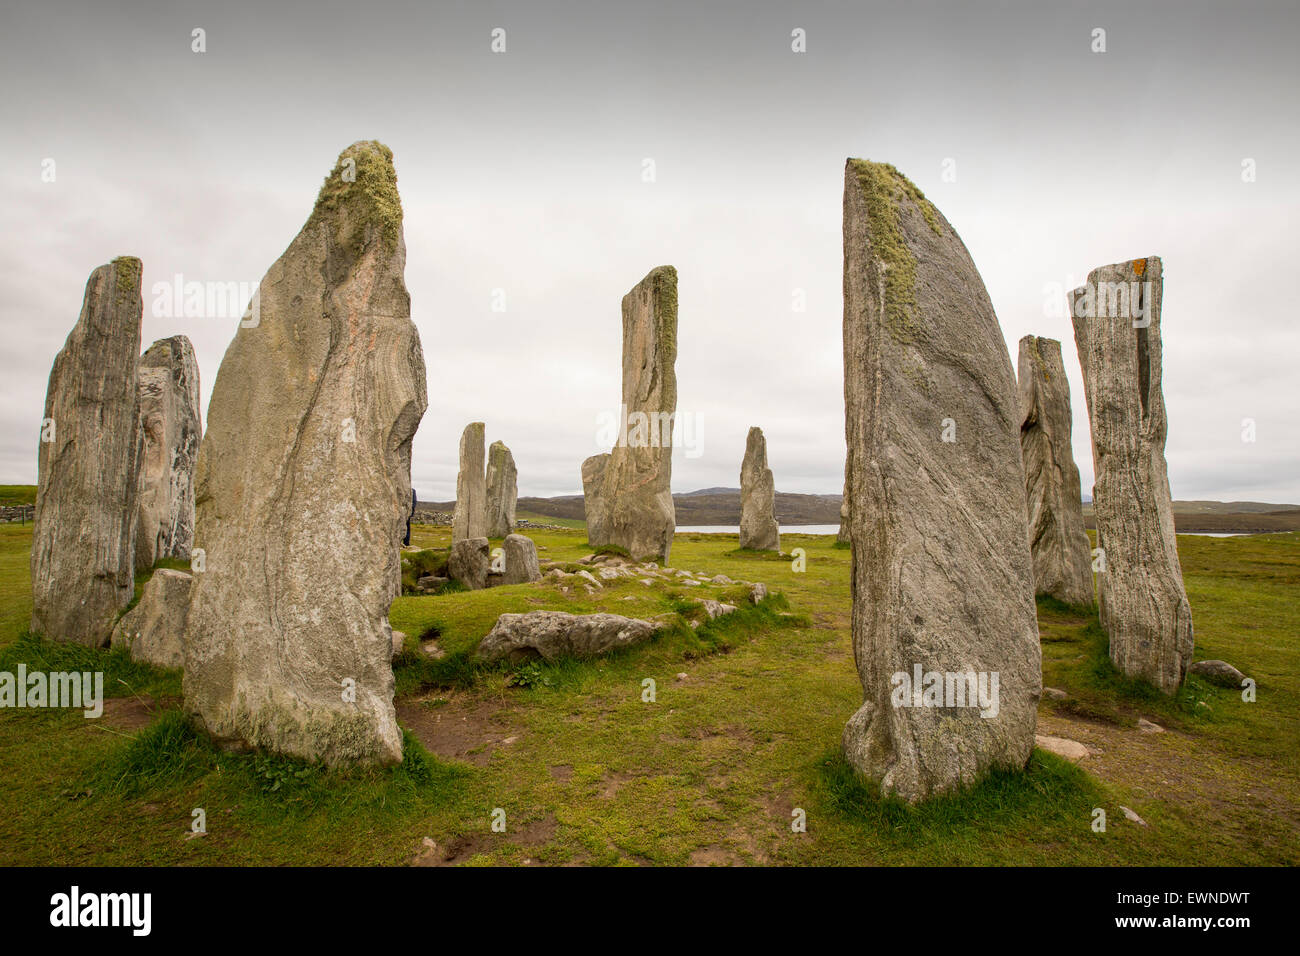 Callanish standing stones and stone circle on the Isle of Lewis near Stornoway, Outer Hebrides, Scotland, UK. The stone circle is probably the most impressive stone circle in the UK, after Stonehenge. Stock Photo